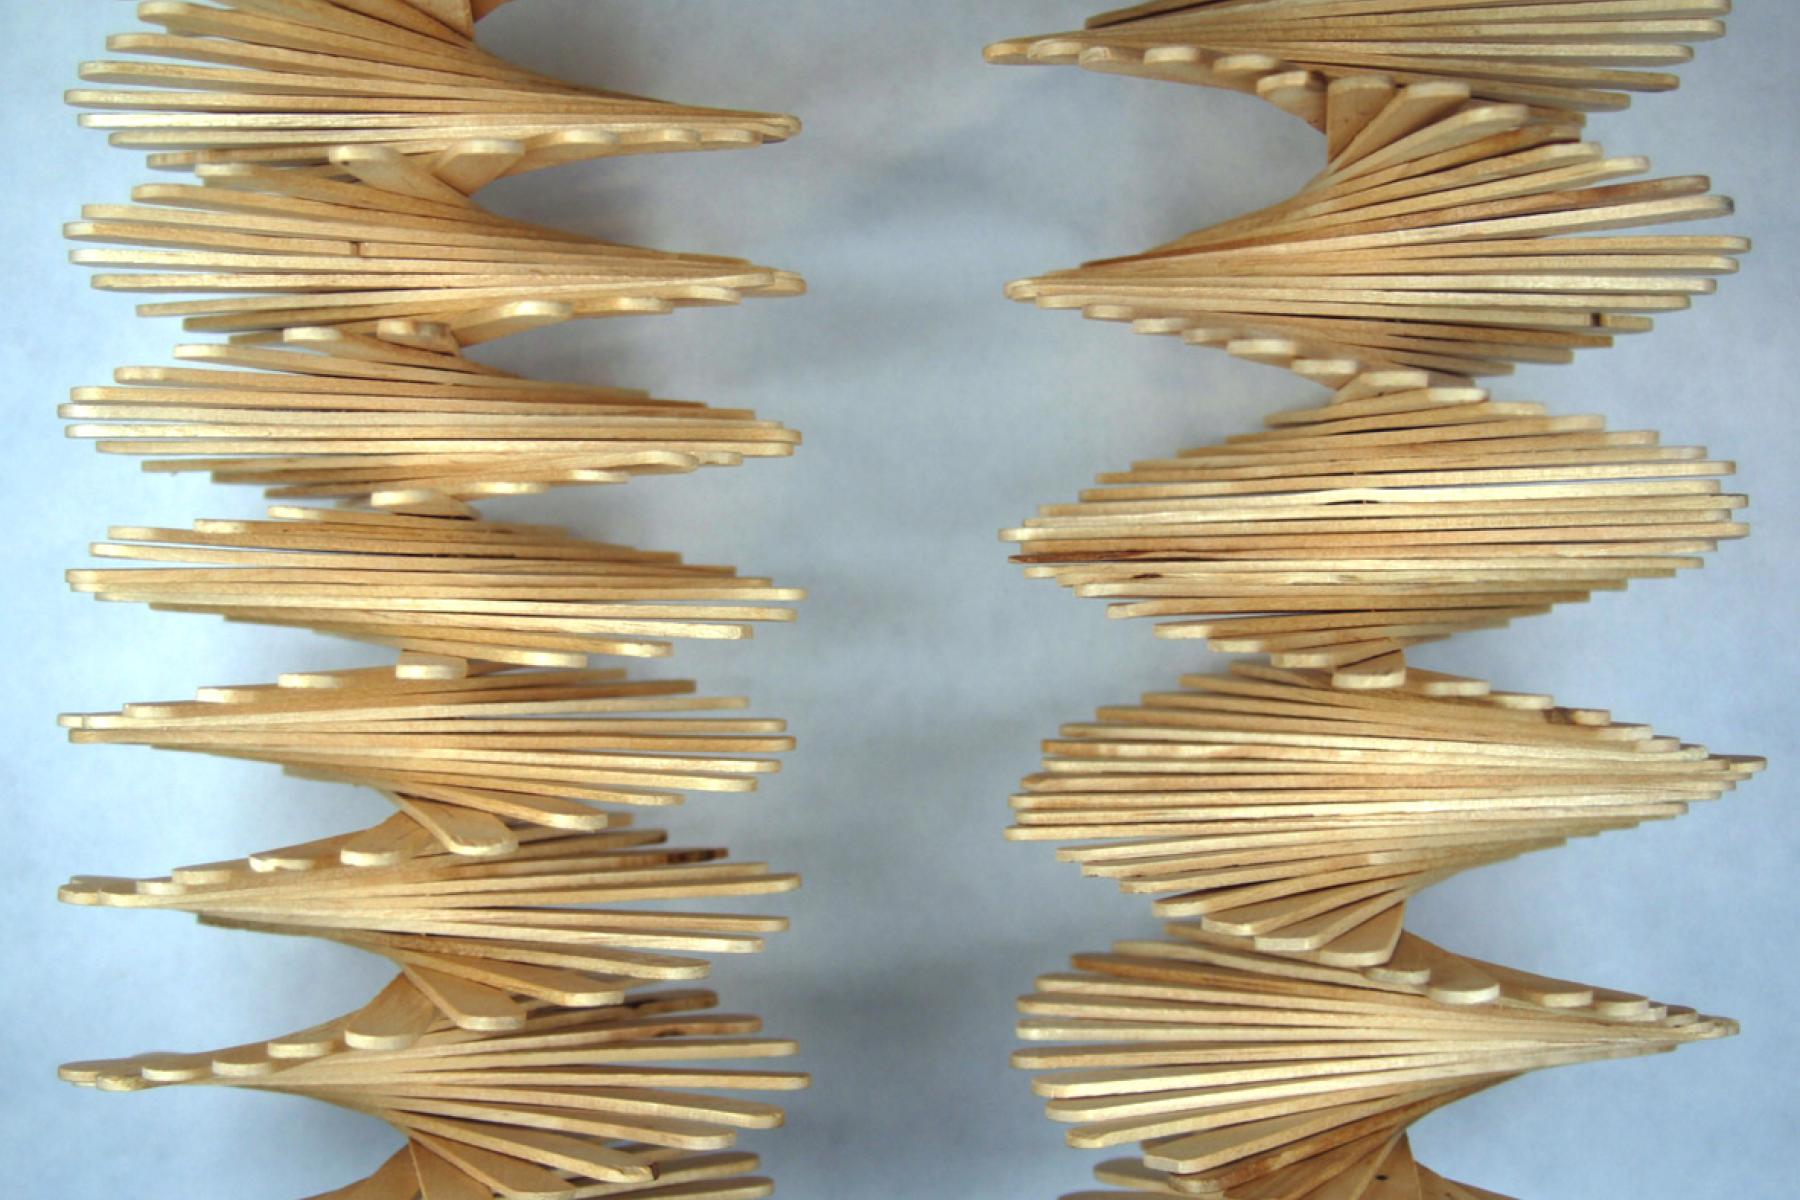 a liquid crystal model made with straight woodsticks but stacked so they're curved.